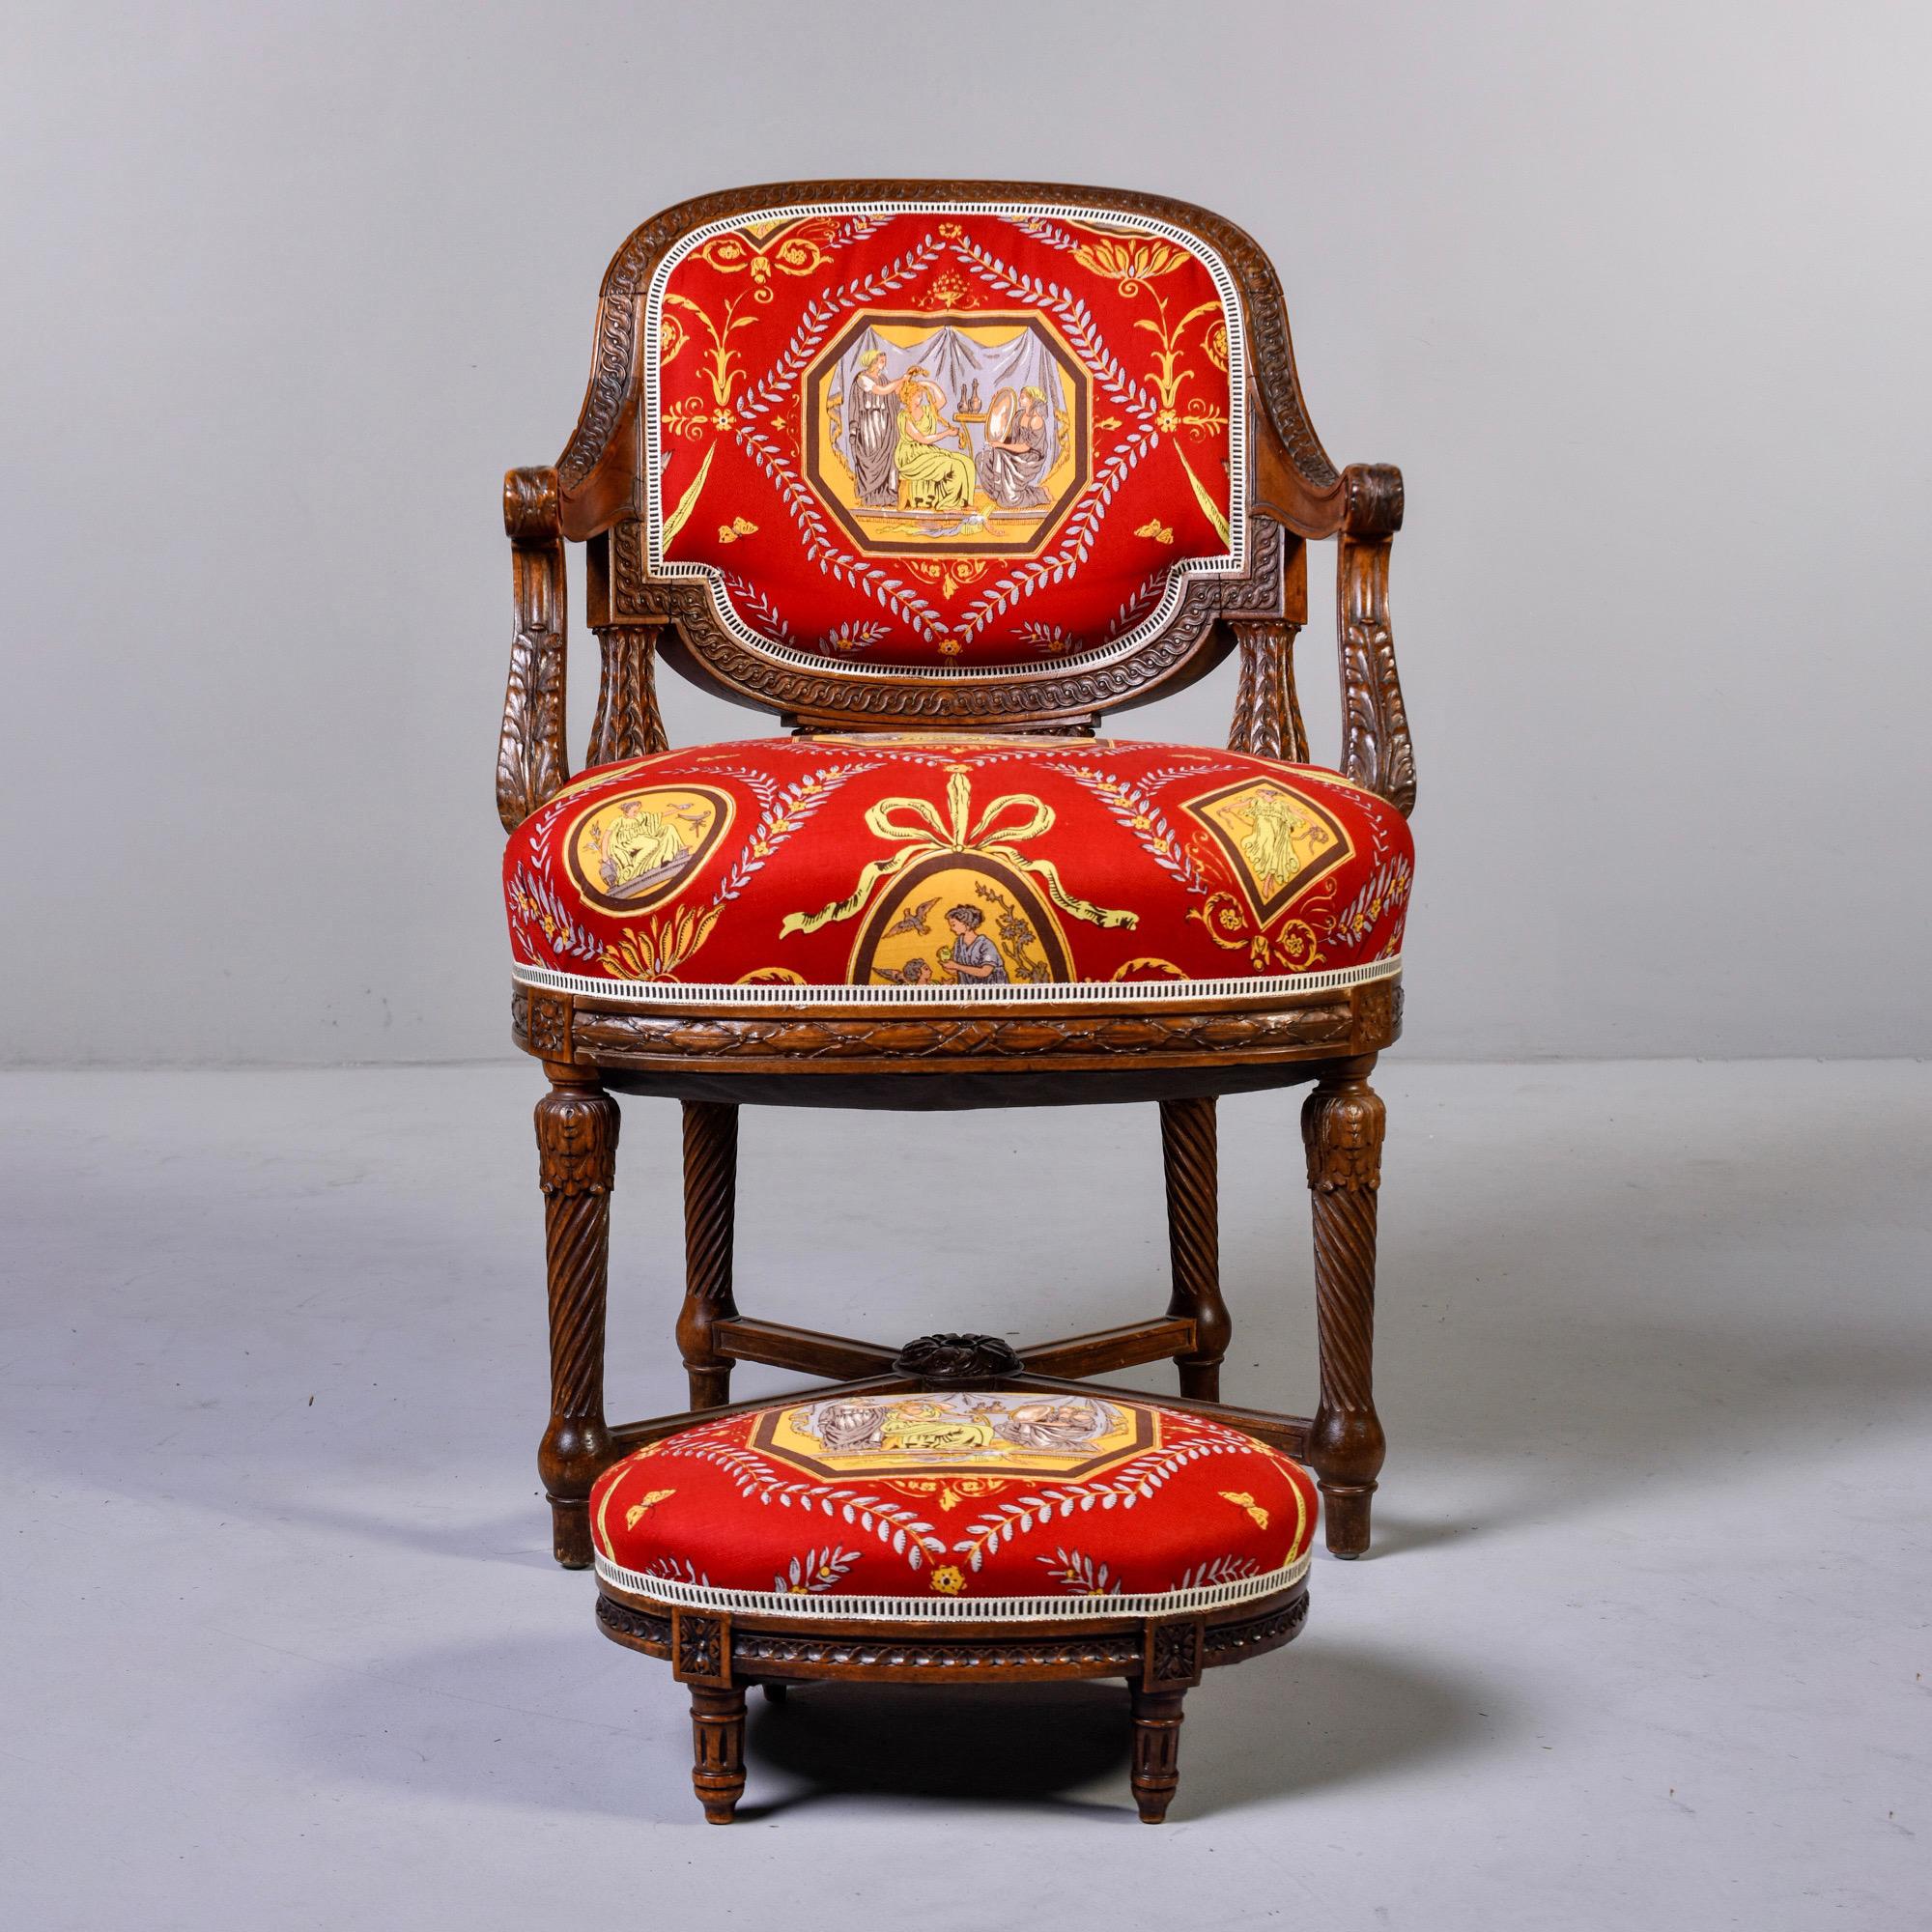 French armchair with carved details and X-form stretcher, circa 1880s. Small oval ottoman is not original to chair, but a good match. Both have been upholstered in Fortuny fabric. Sold and priced as a set.

Measures: Arm height = 27”, seat height